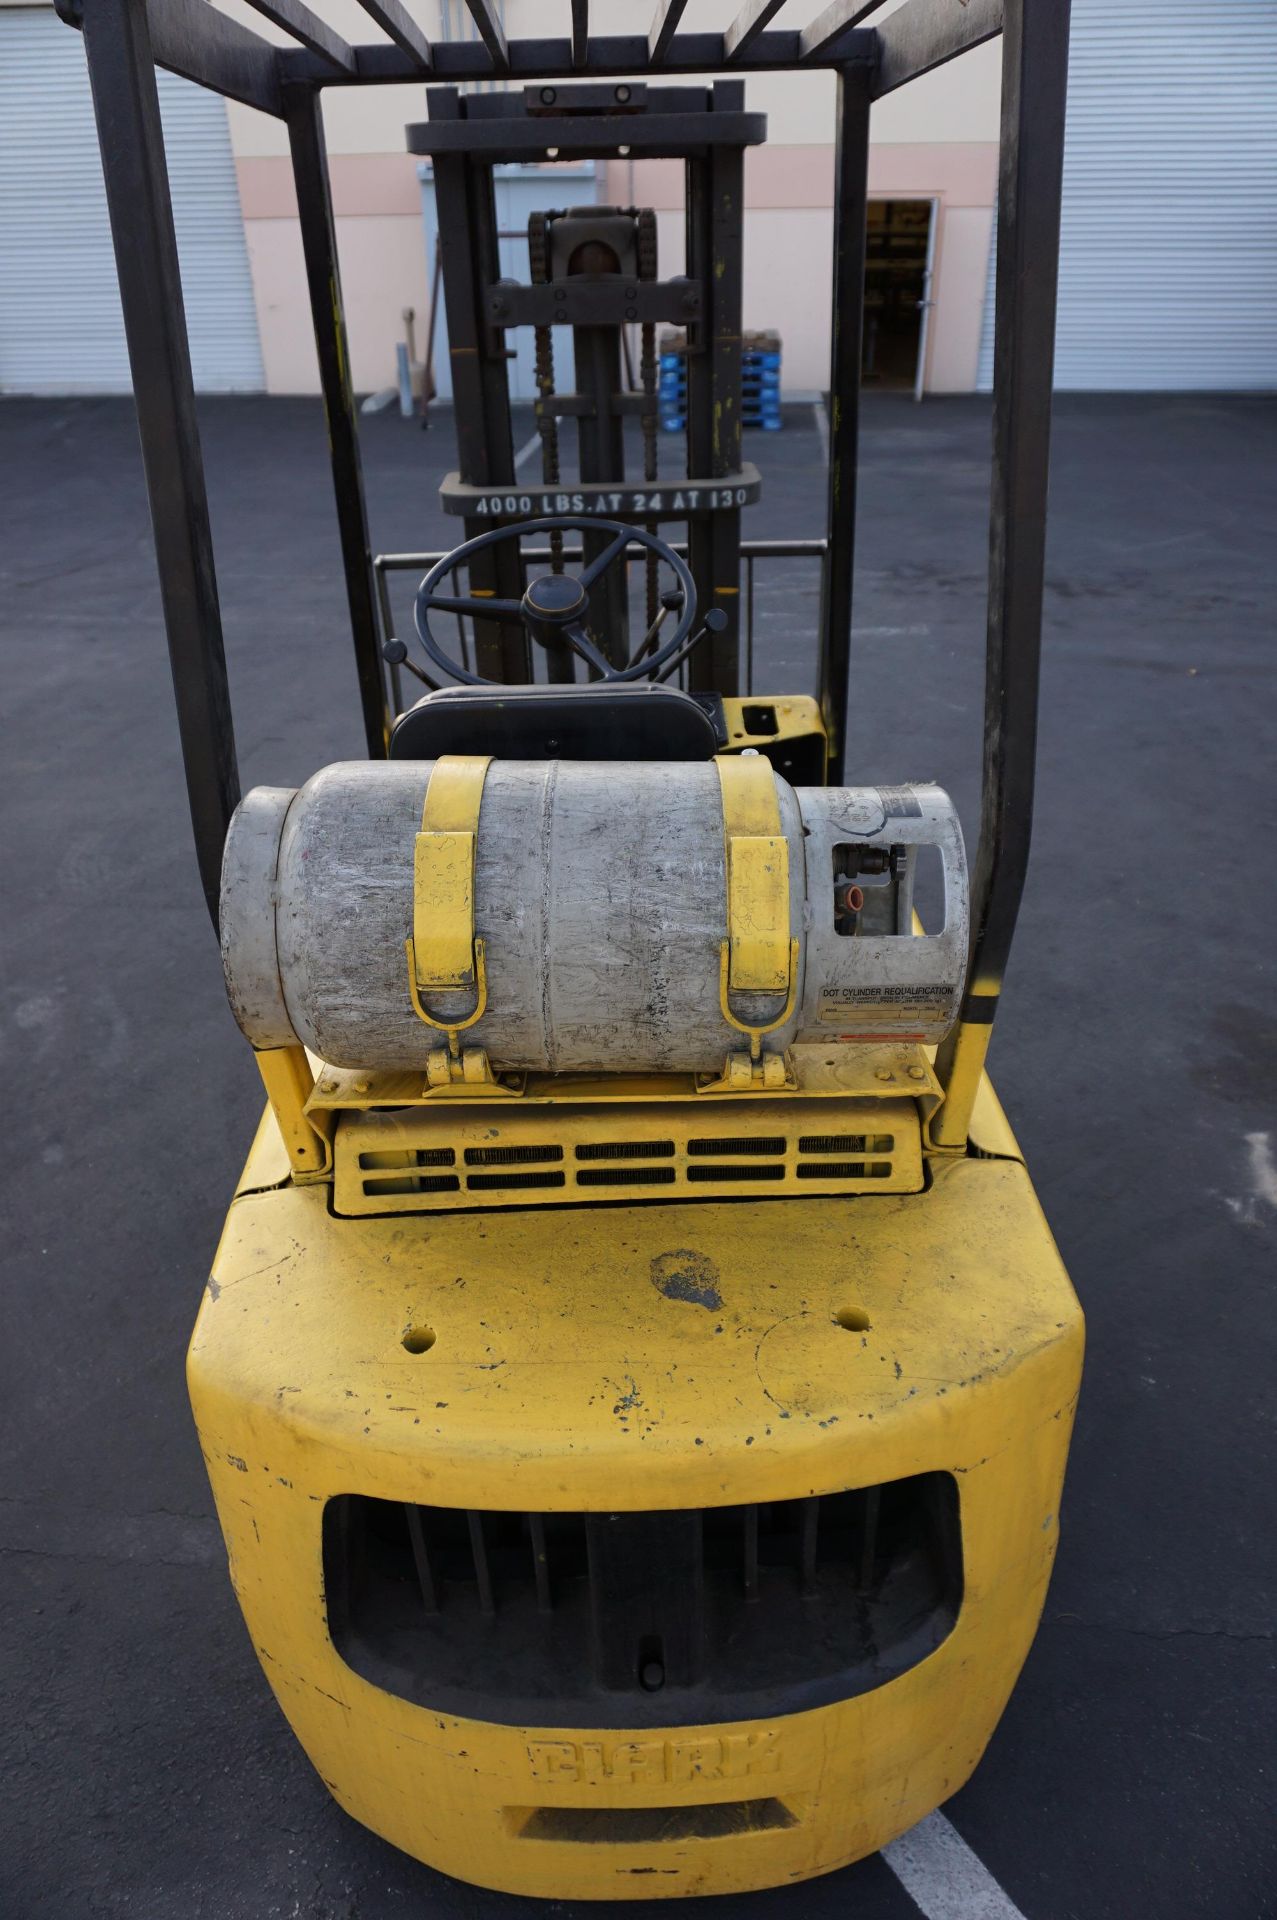 CLARK C50 FORKLIFT 4000 LB CAP, S/N 355-1488-3611, WITH ORIGINAL MANUALS AND CATALOGS - Image 4 of 7